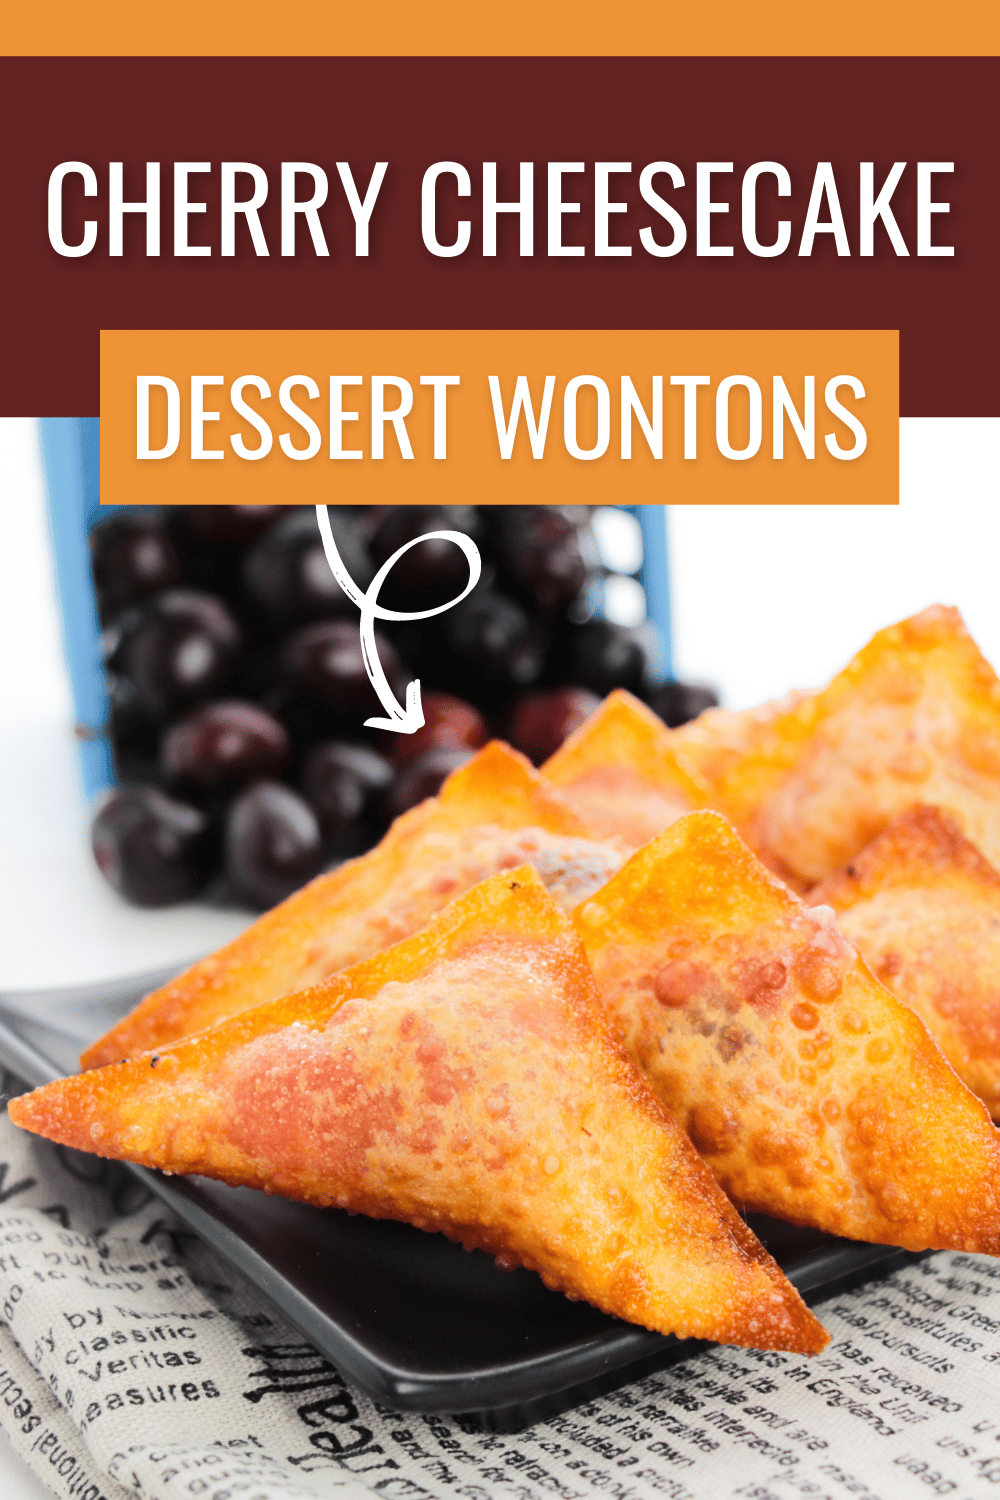 These Cherry Cheesecake Dessert Wontons are the perfect way to end any meal. They are easy to make and the filling is so delicious! #dessertwontons #cherrycheesecake #cherrycheesecakedessertwontons #cherry #wontons via @wondermomwannab